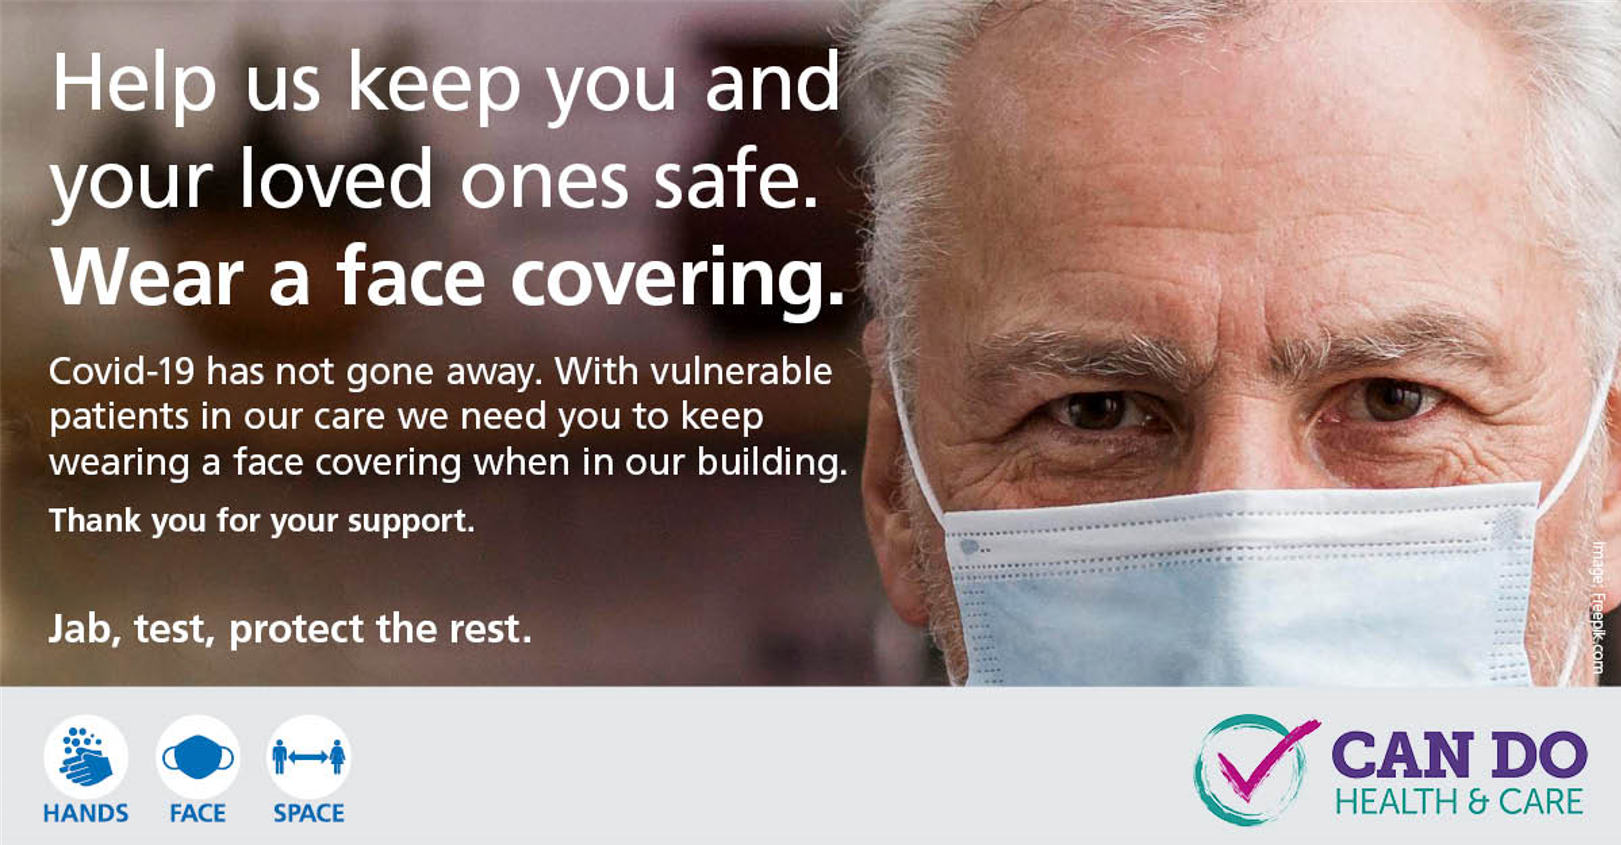 Help us keep you and your loved ones safe